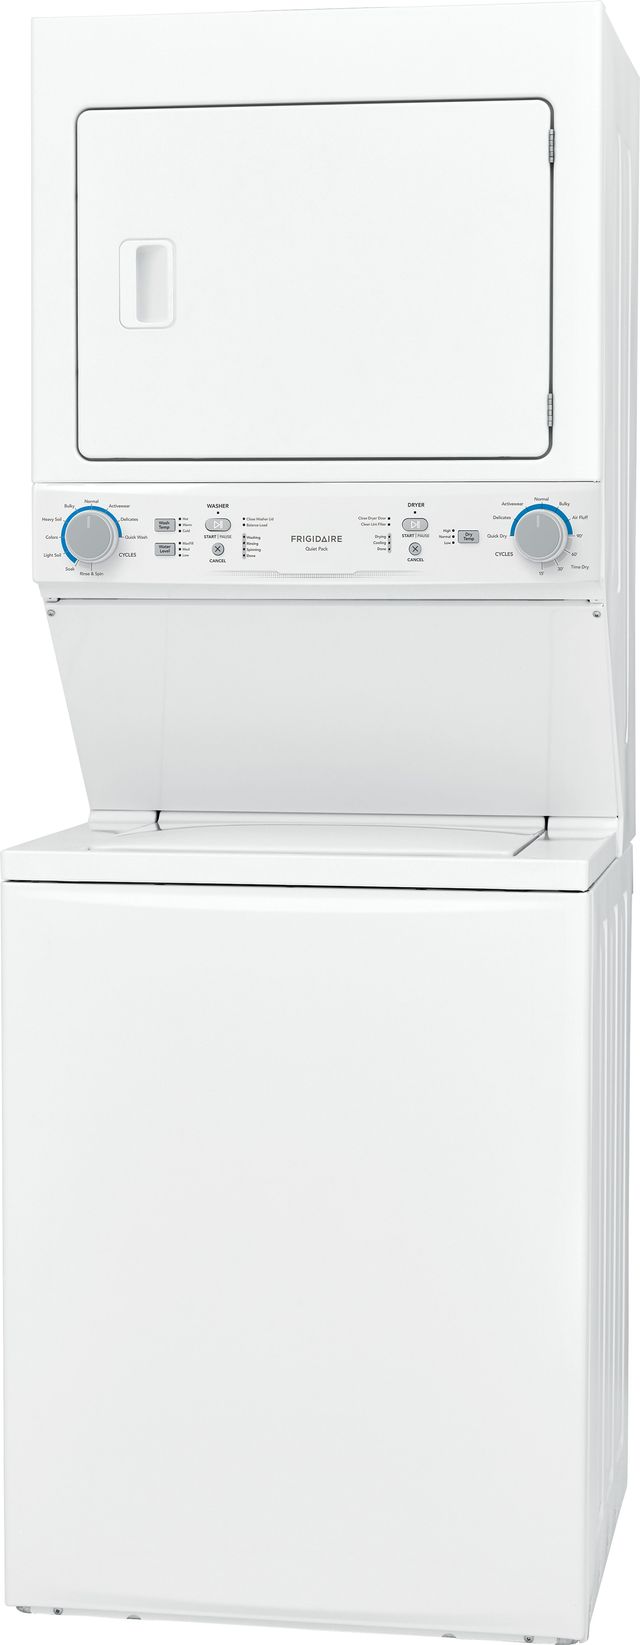 Frigidaire® 3.9 Cu. Ft. Washer, 5.6 Cu. Ft. White Gas Stack Laundry 7